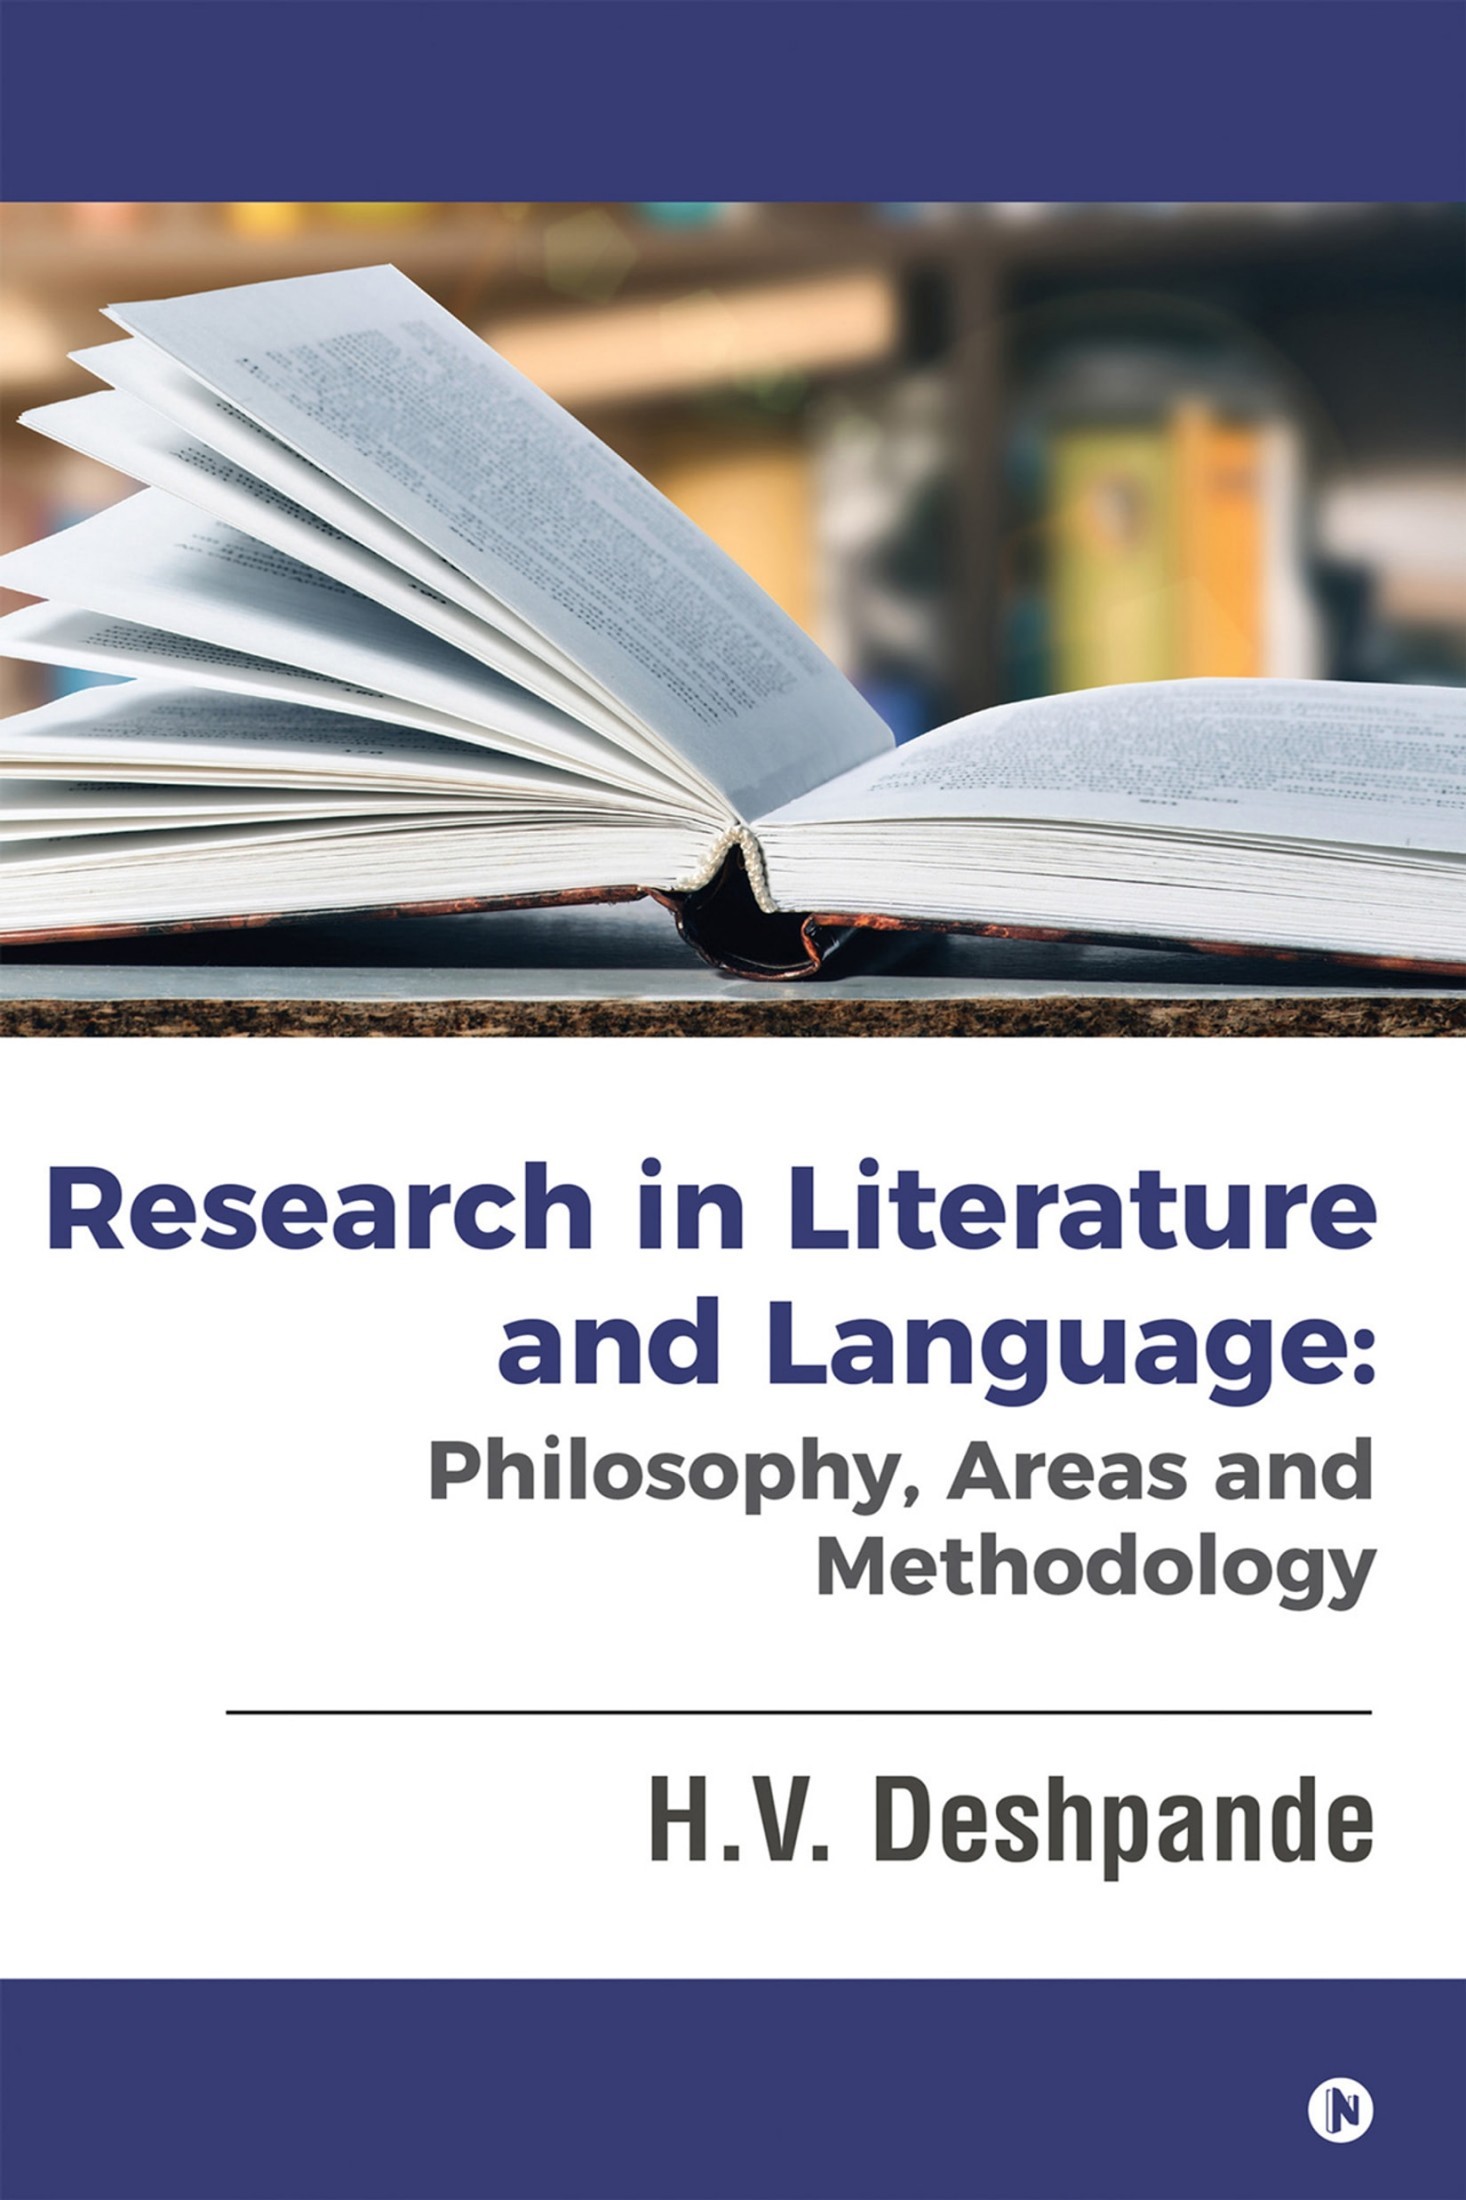 Research in Literature and Language: Philosophy, Areas and Methodology